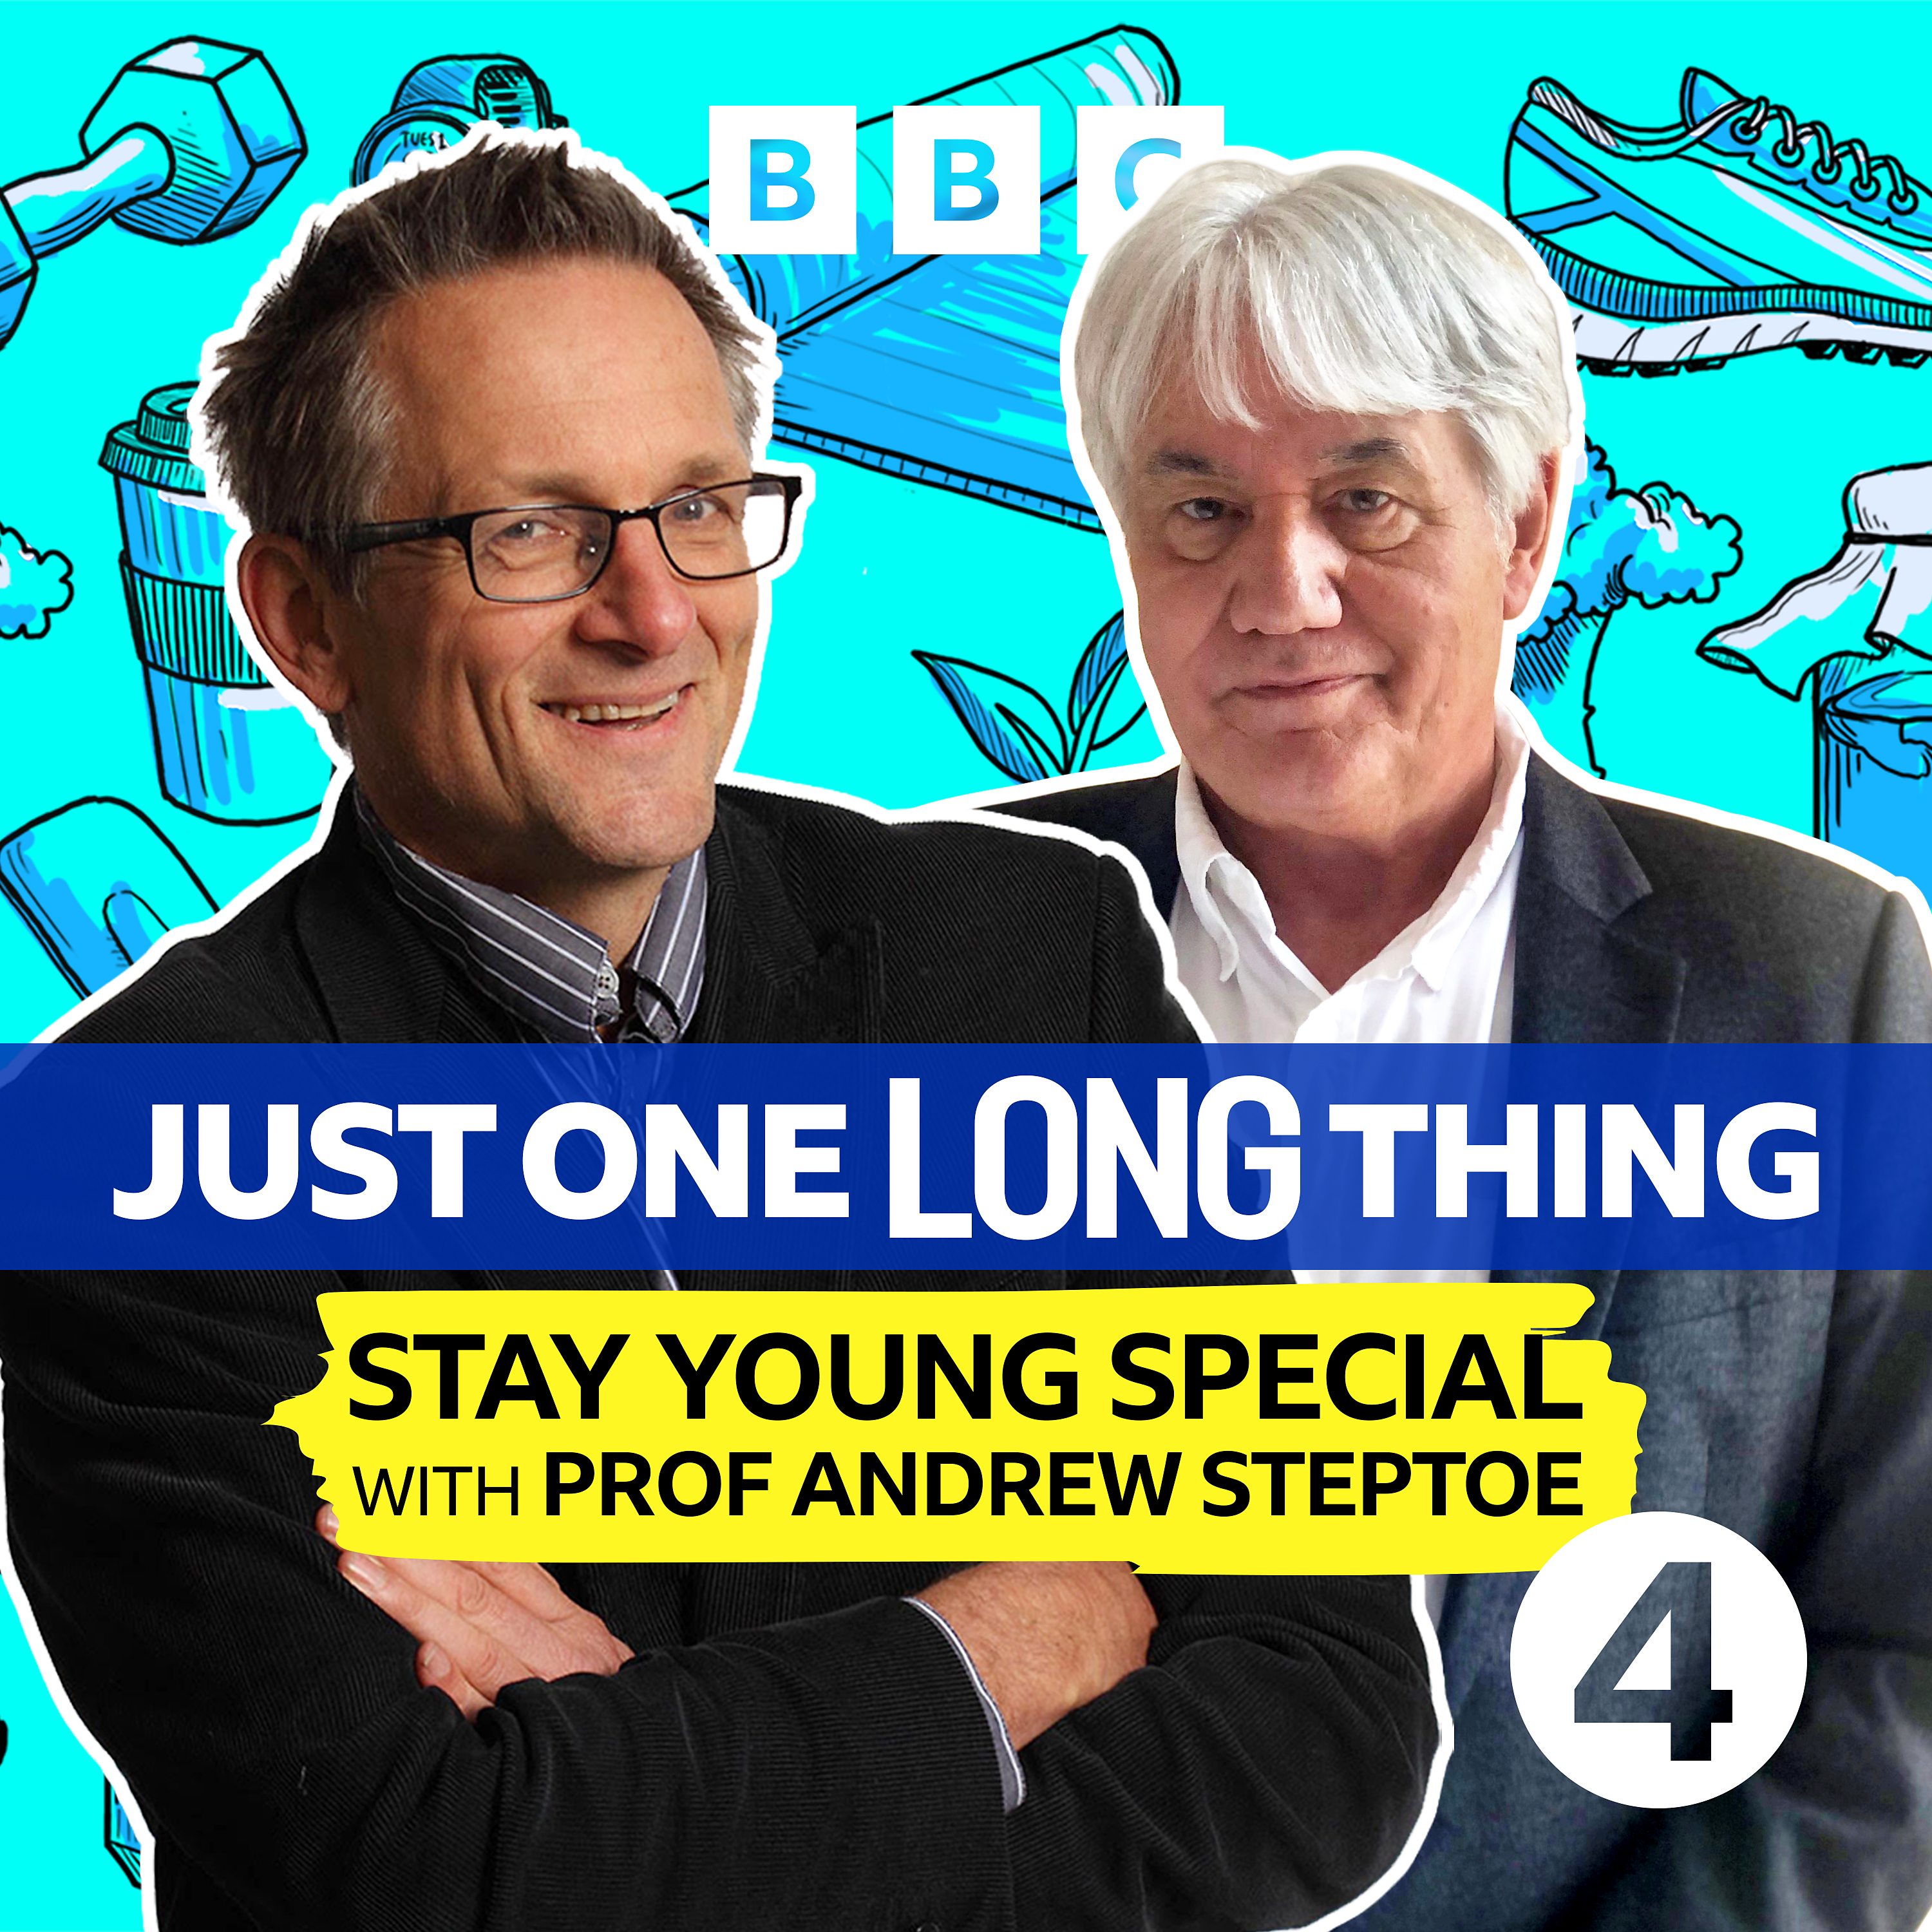 Just One Thing - with Michael Mosley